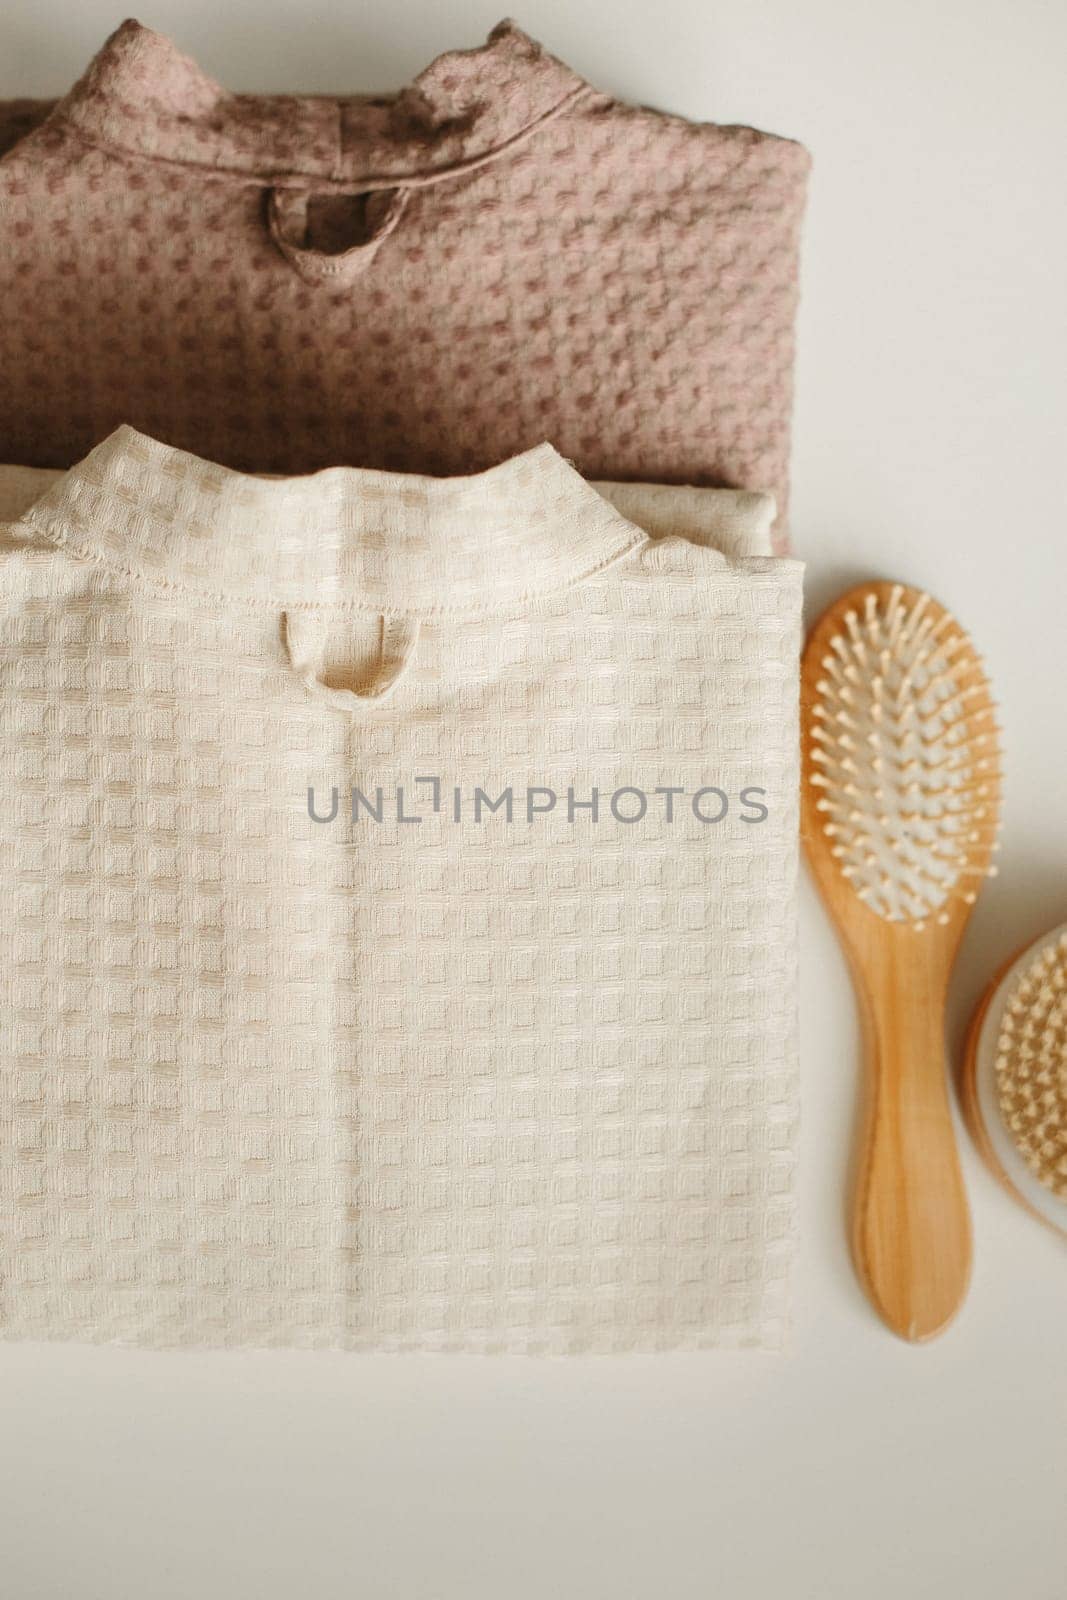 On a white surface are two bathrobes, a comb and a washcloth by Sd28DimoN_1976